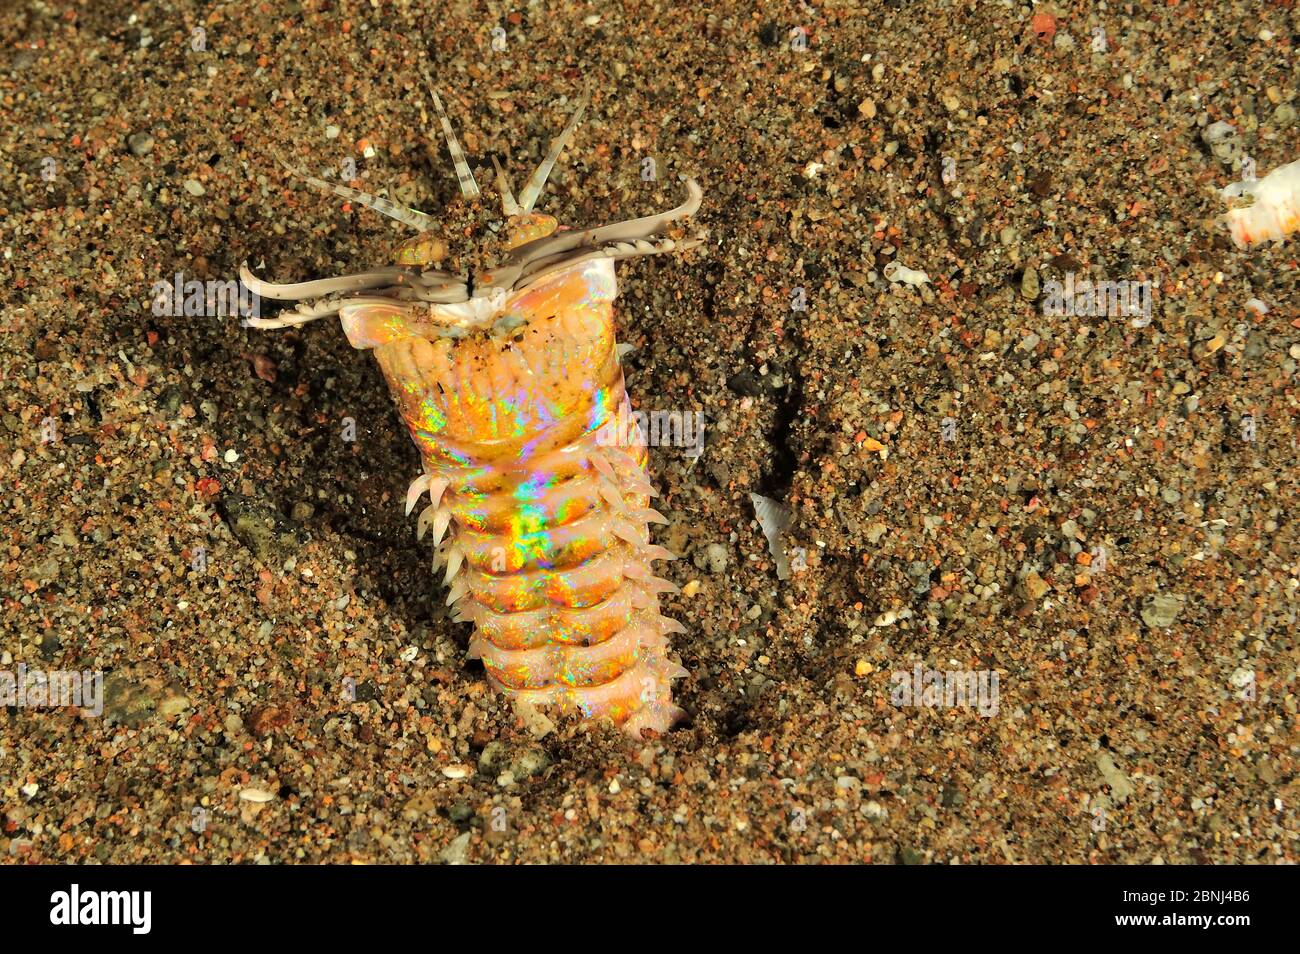 Bobbit worm (Eunice aphroditois) coming out burrow at night, Sulu Sea, Philippines Stock Photo